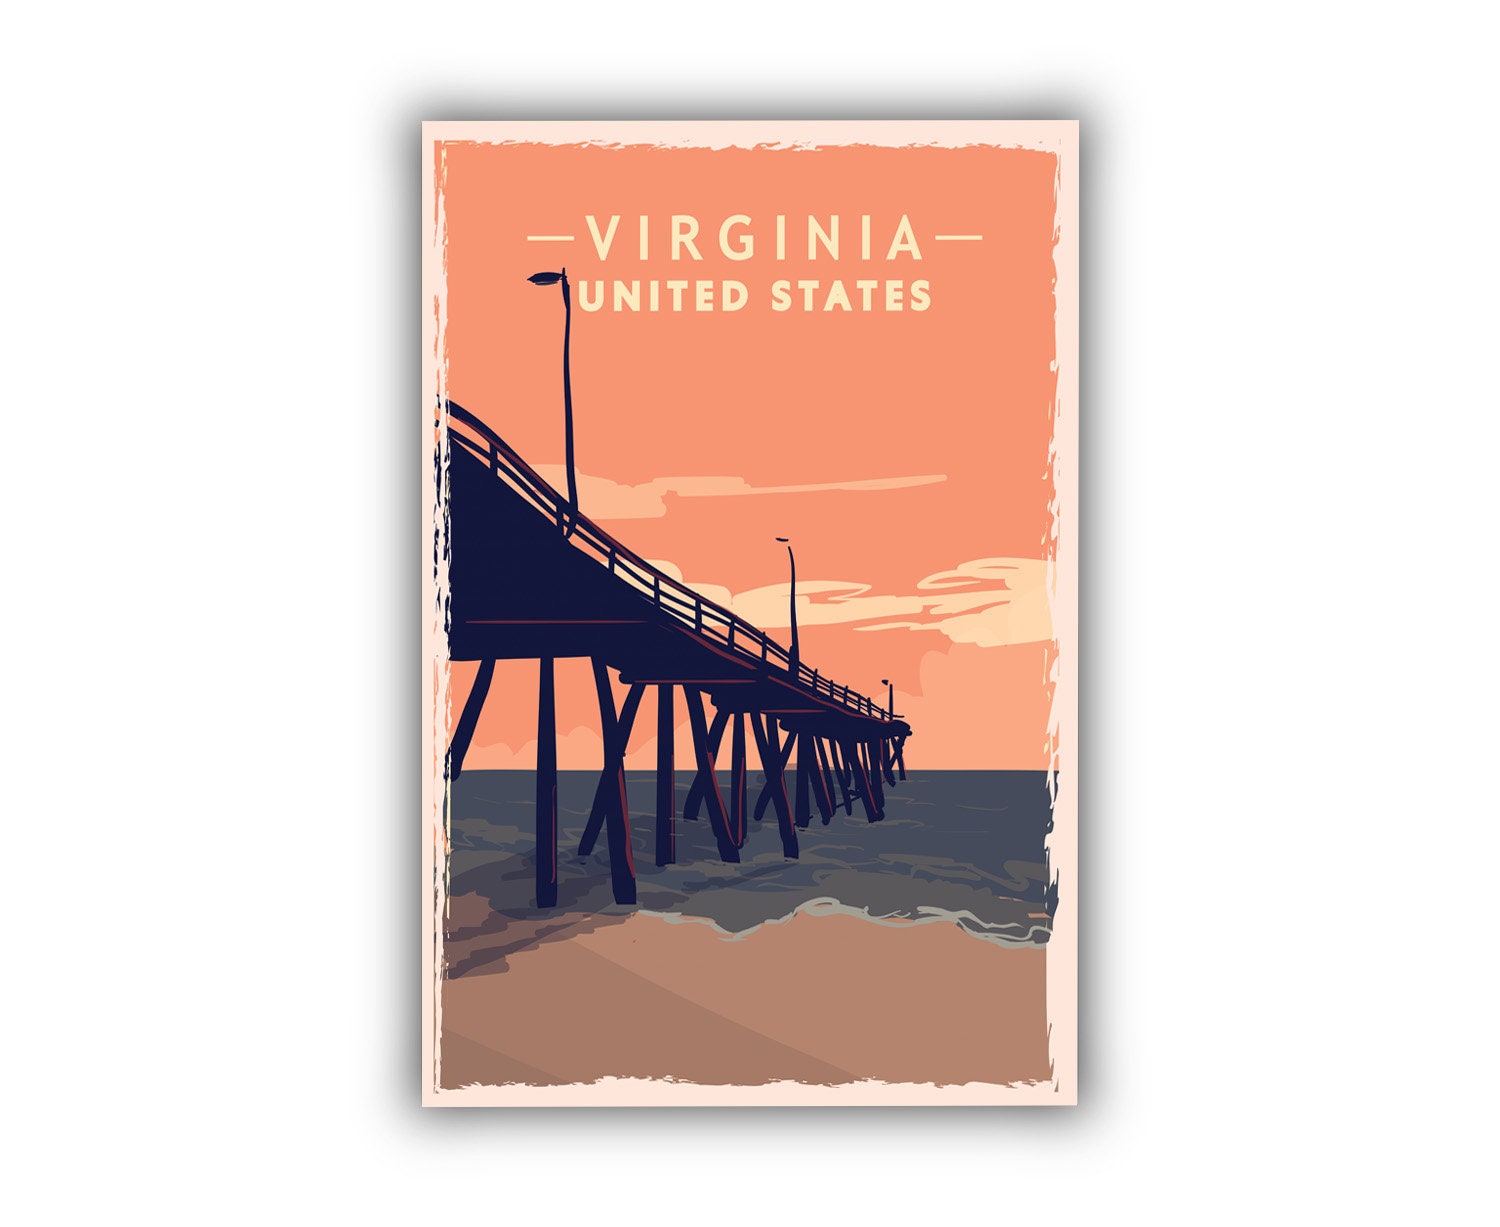 Retro Style Travel Poster, Virginia Vintage Rustic Poster Print, Home Wall Art, Office Wall Decor, Poster Prints, Virginia, State Map Poster